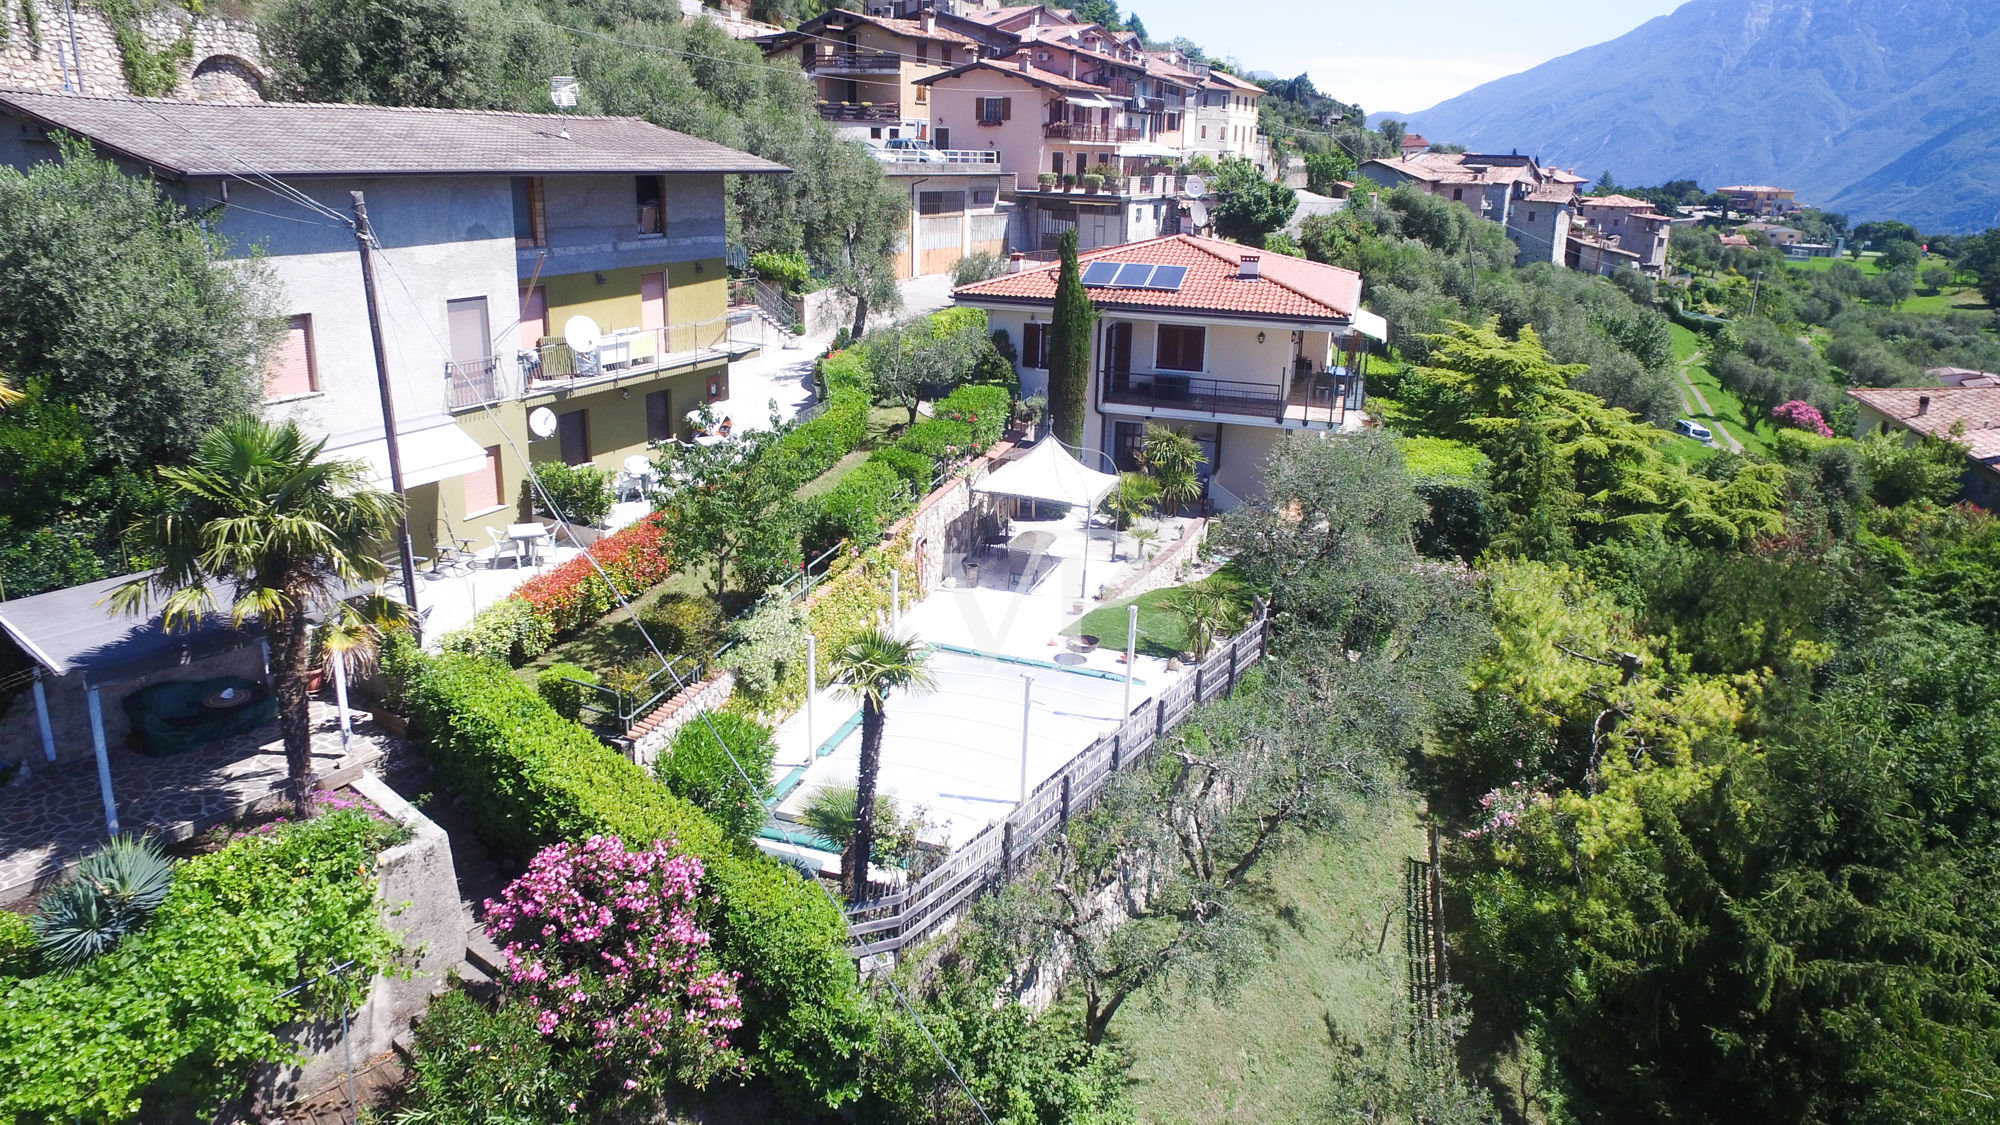 Villa with many possibilities. Main house with three independent apartments.